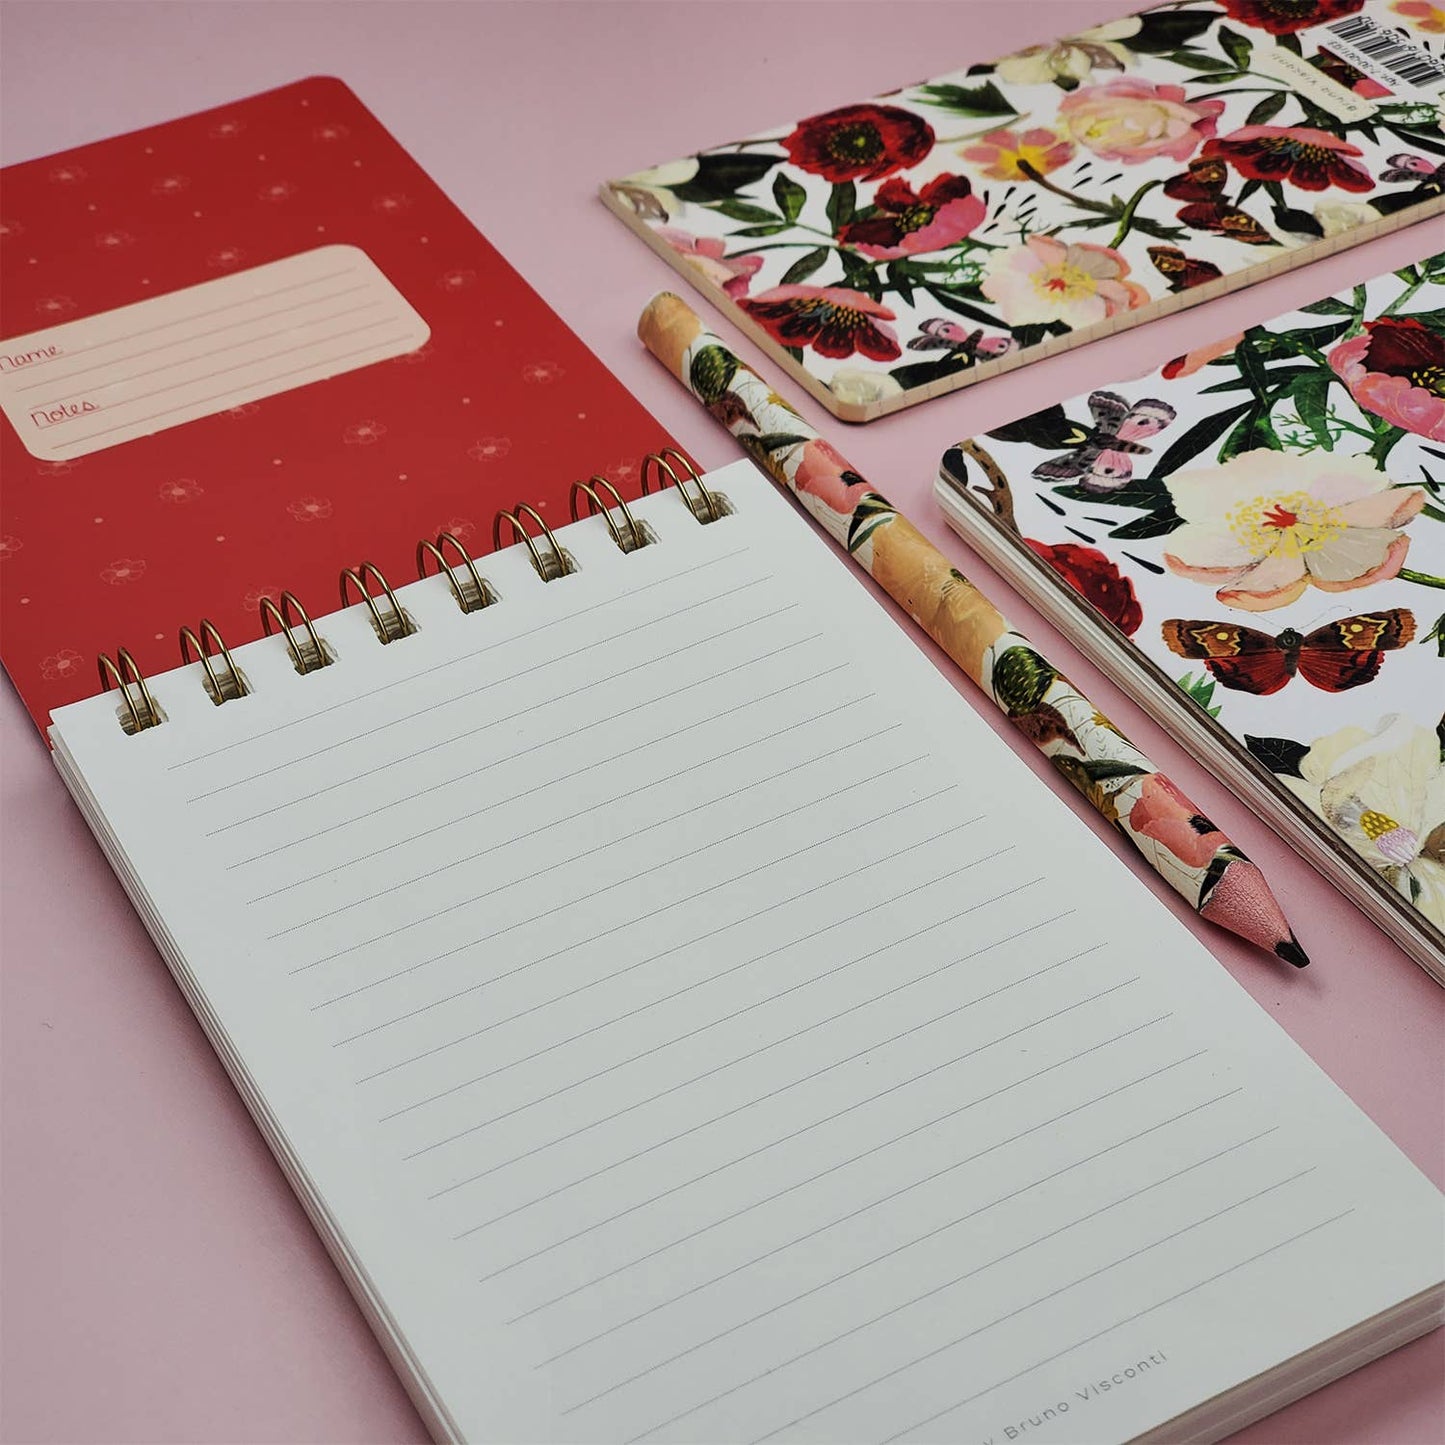 Small Spiral Notebook - Peonies